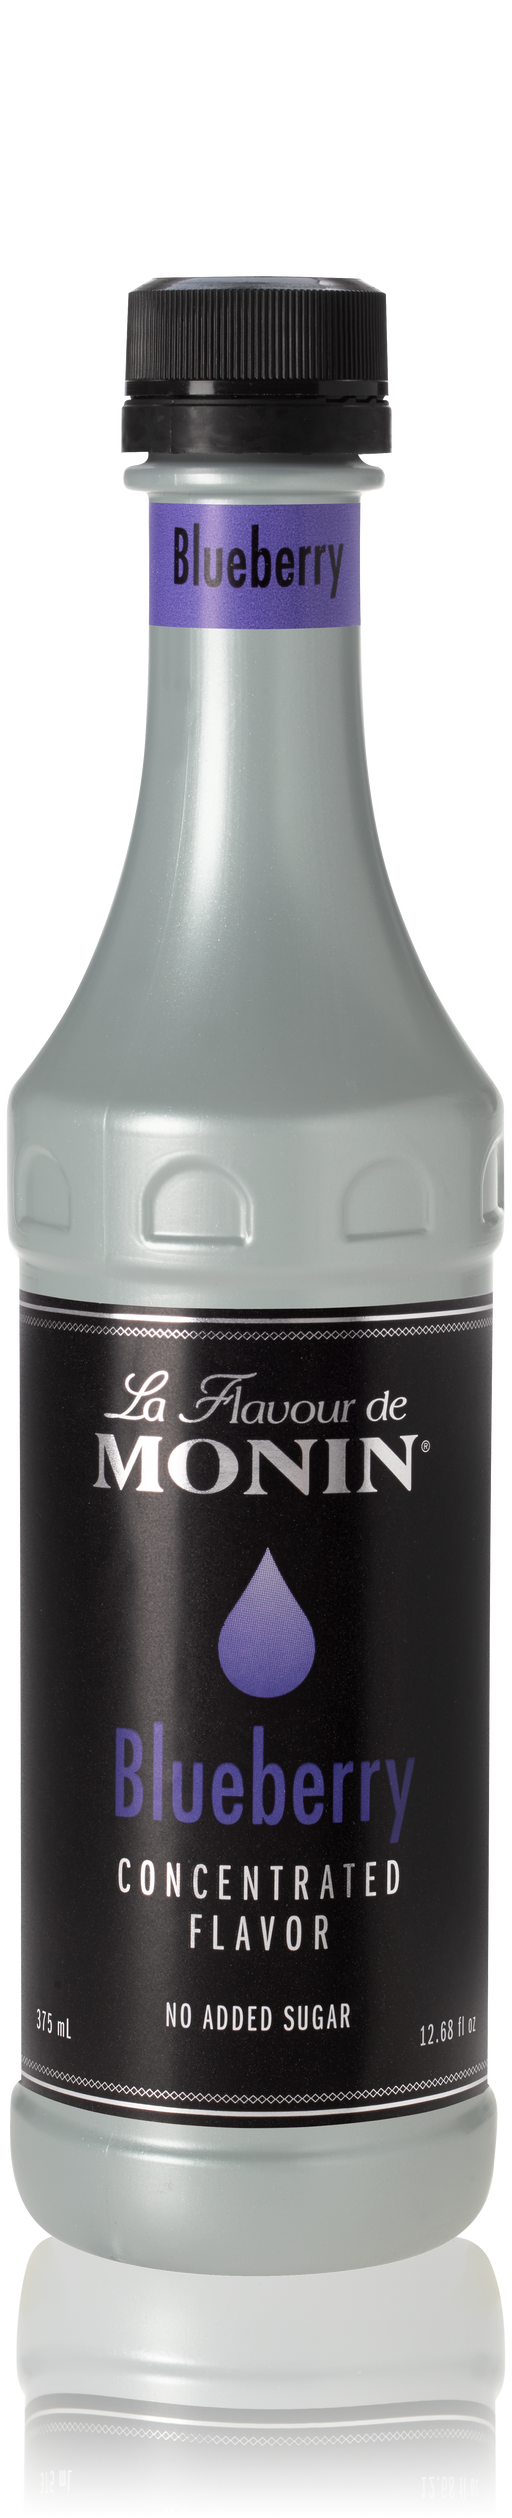 Monin Blueberry Concentrated Flavor 375mL Bottle